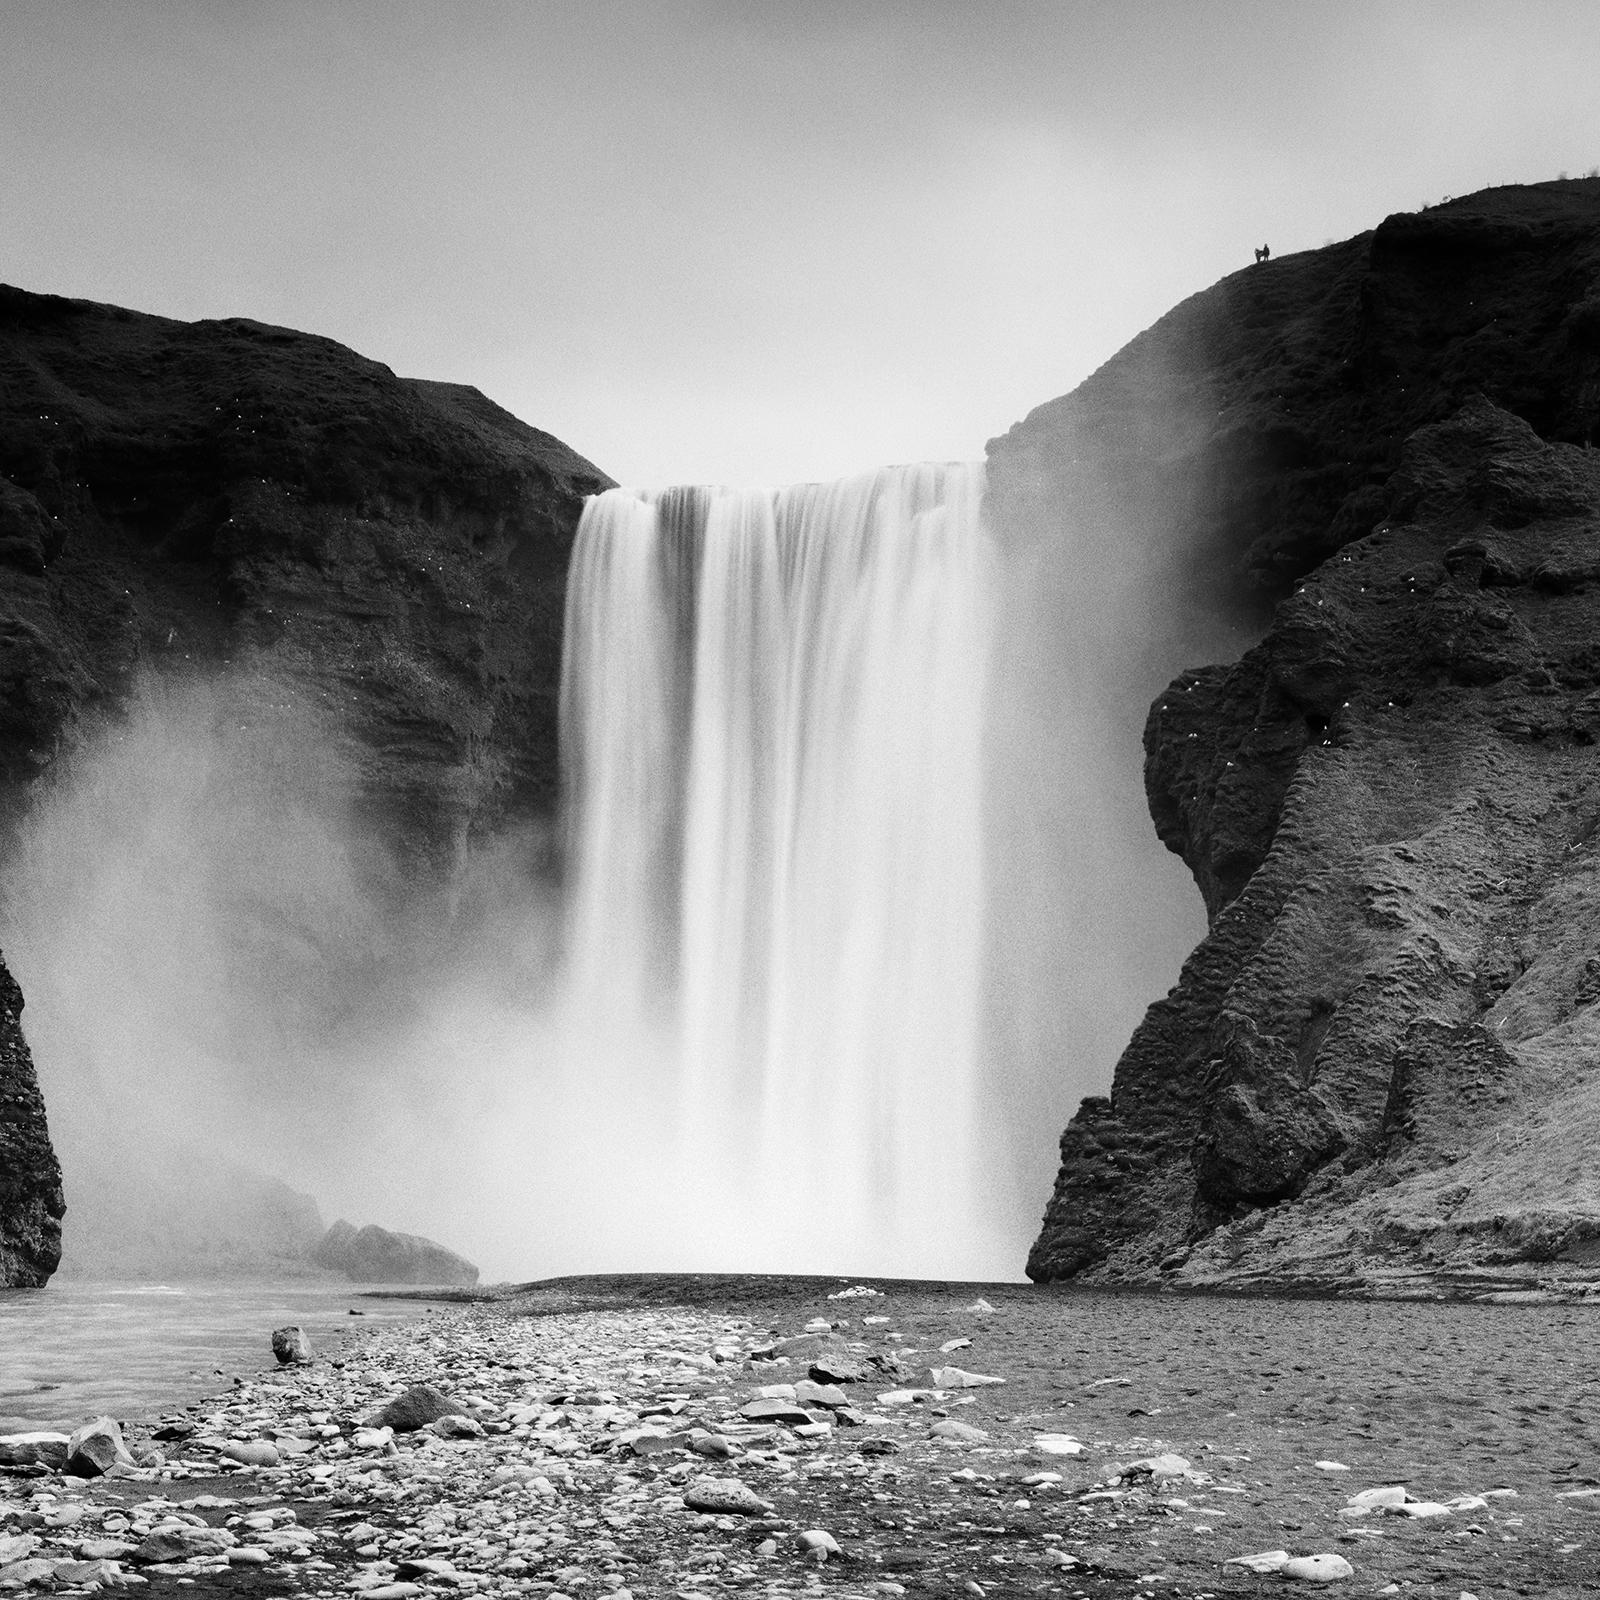 Black and white fine art long exposure landscape - waterscape photography. Skogafoss, gigantic waterfall, Iceland. Archival pigment ink print, edition of 9. Signed, titled, dated and numbered by artist. Certificate of authenticity included. Printed